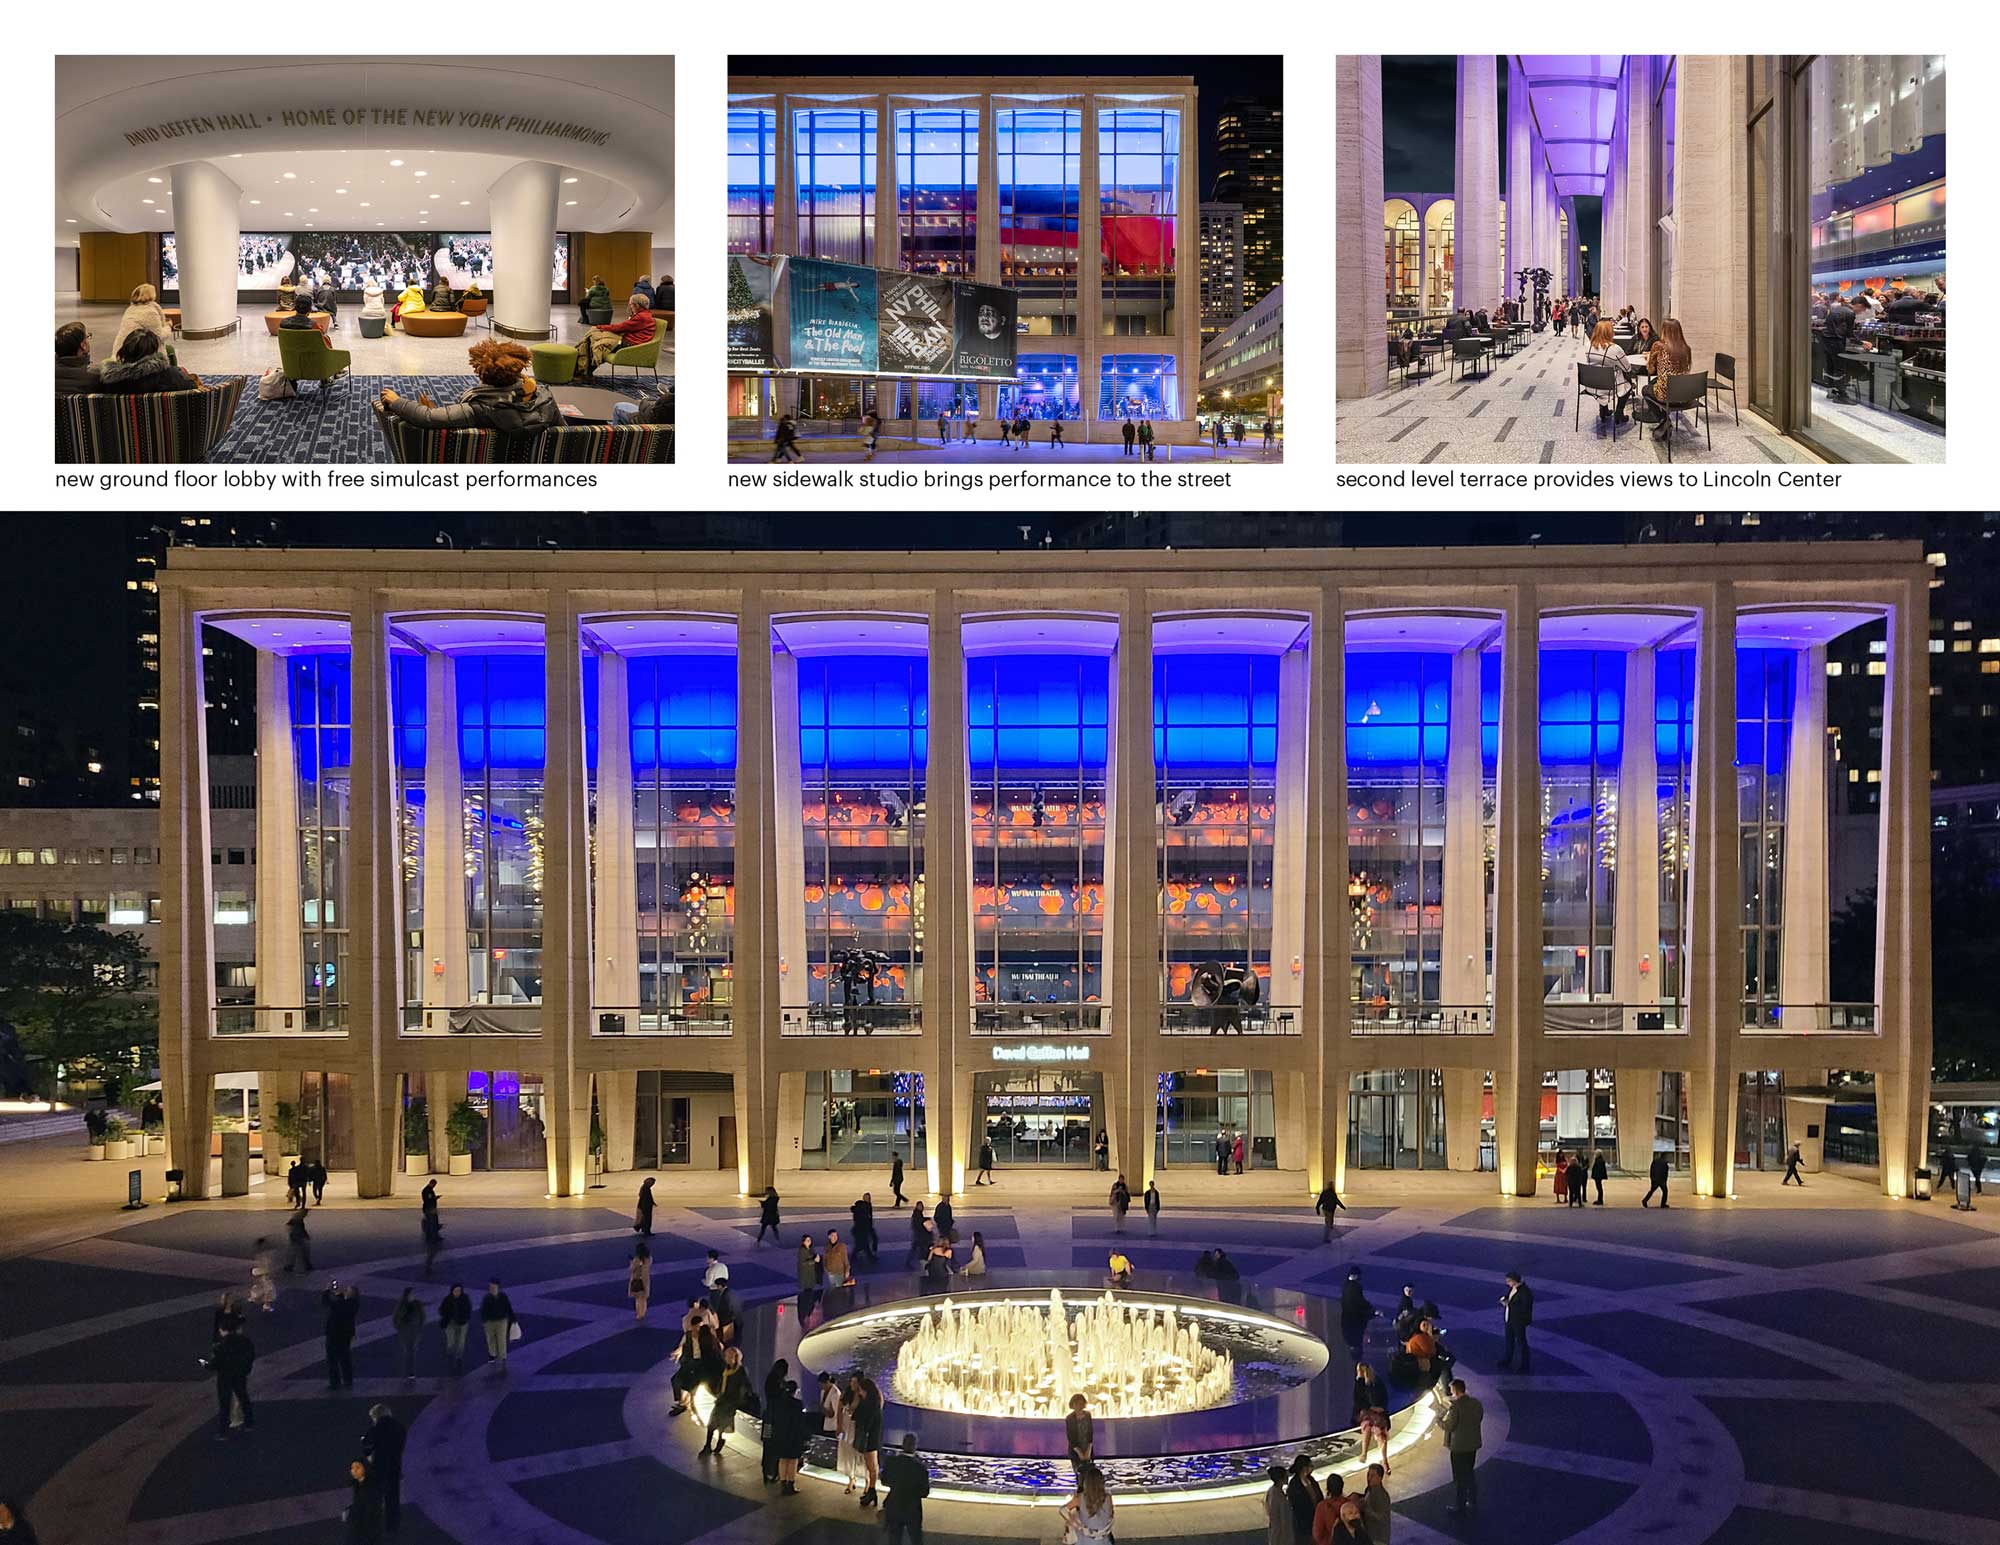 Collage of David Geffen Hall featuring interior and exterior images